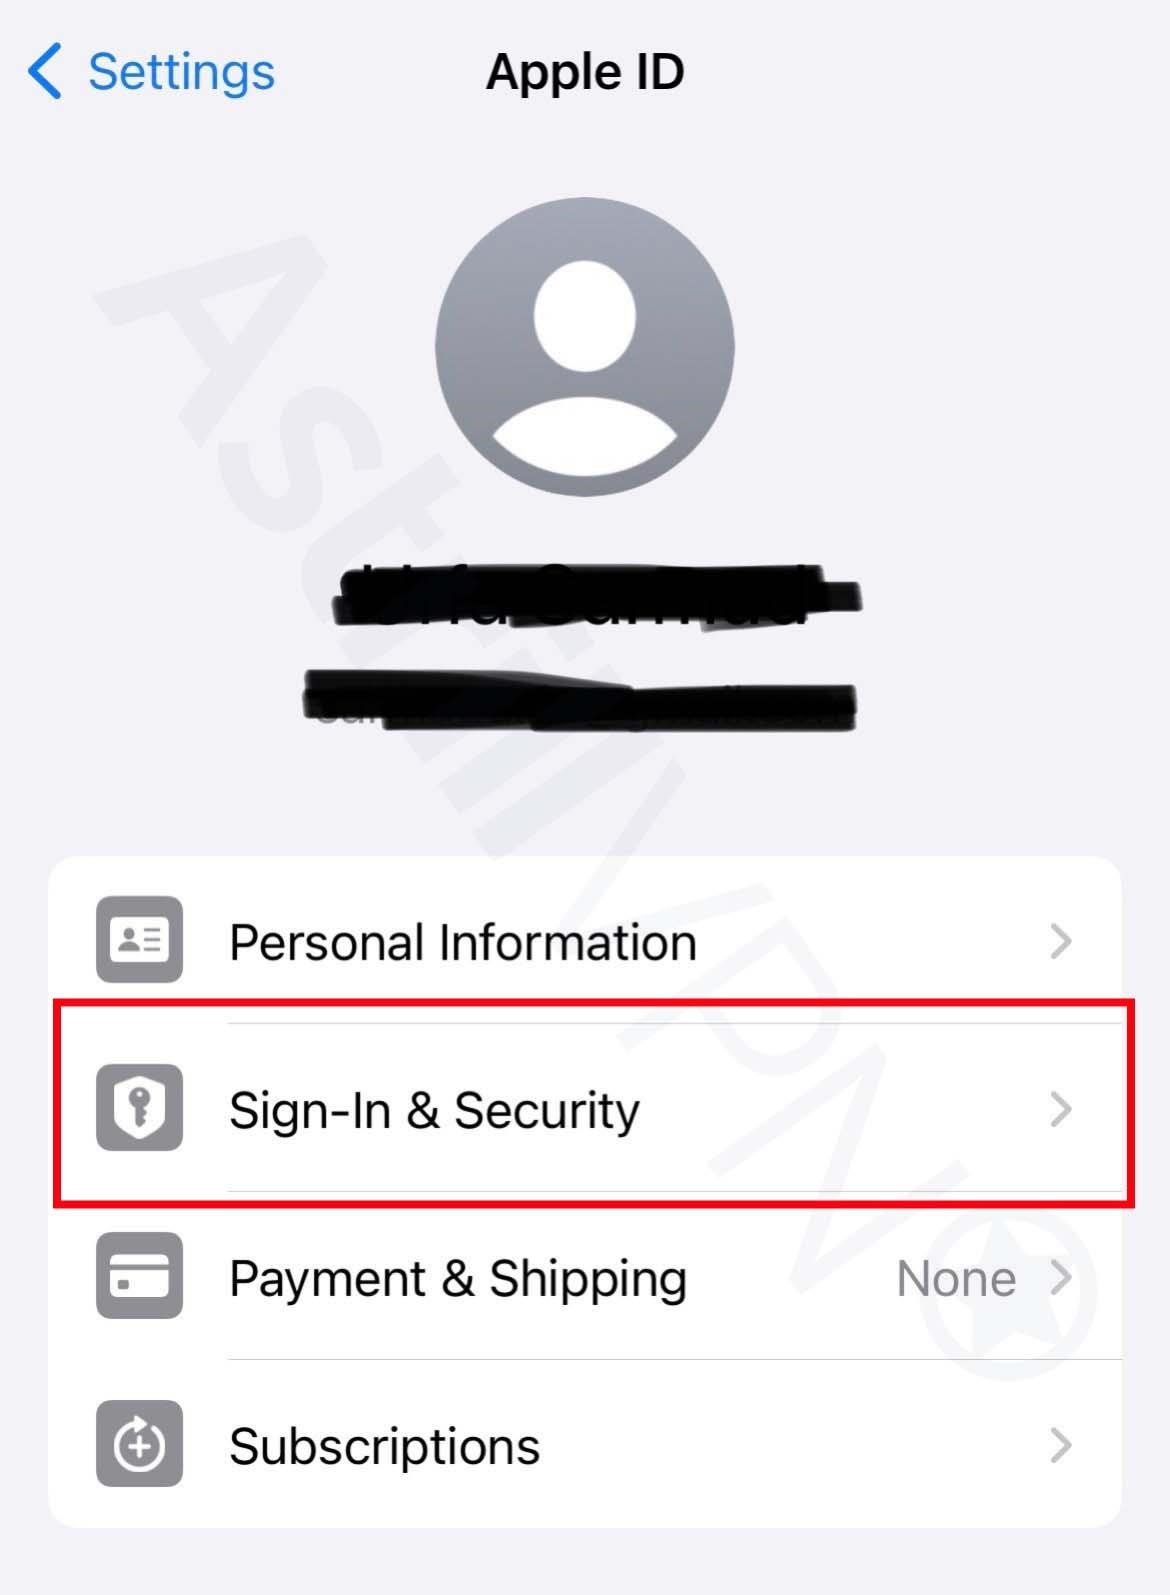 Sign-In and Security